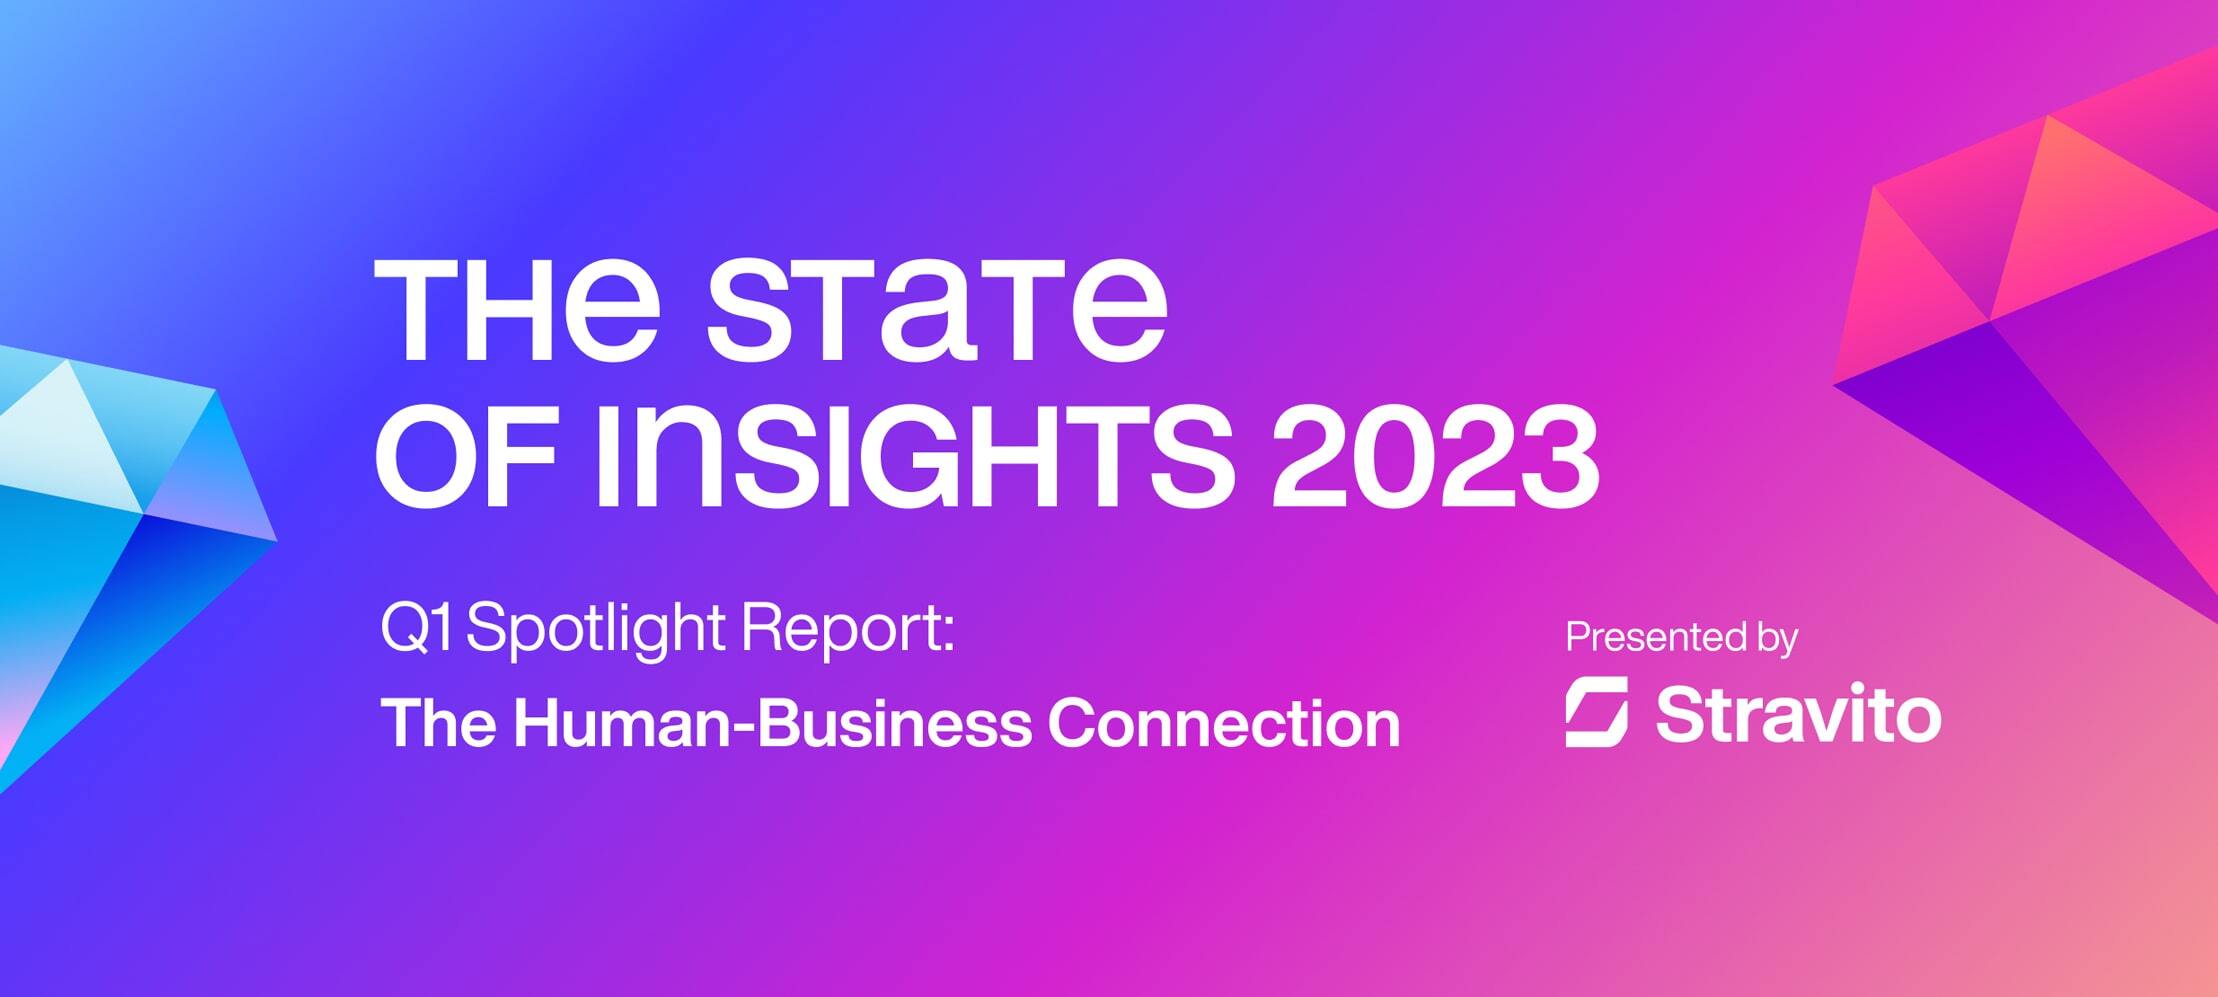 The State of Insights Q1 2023 Spotlight Report: The Human-Business Connection, presented by Stravito